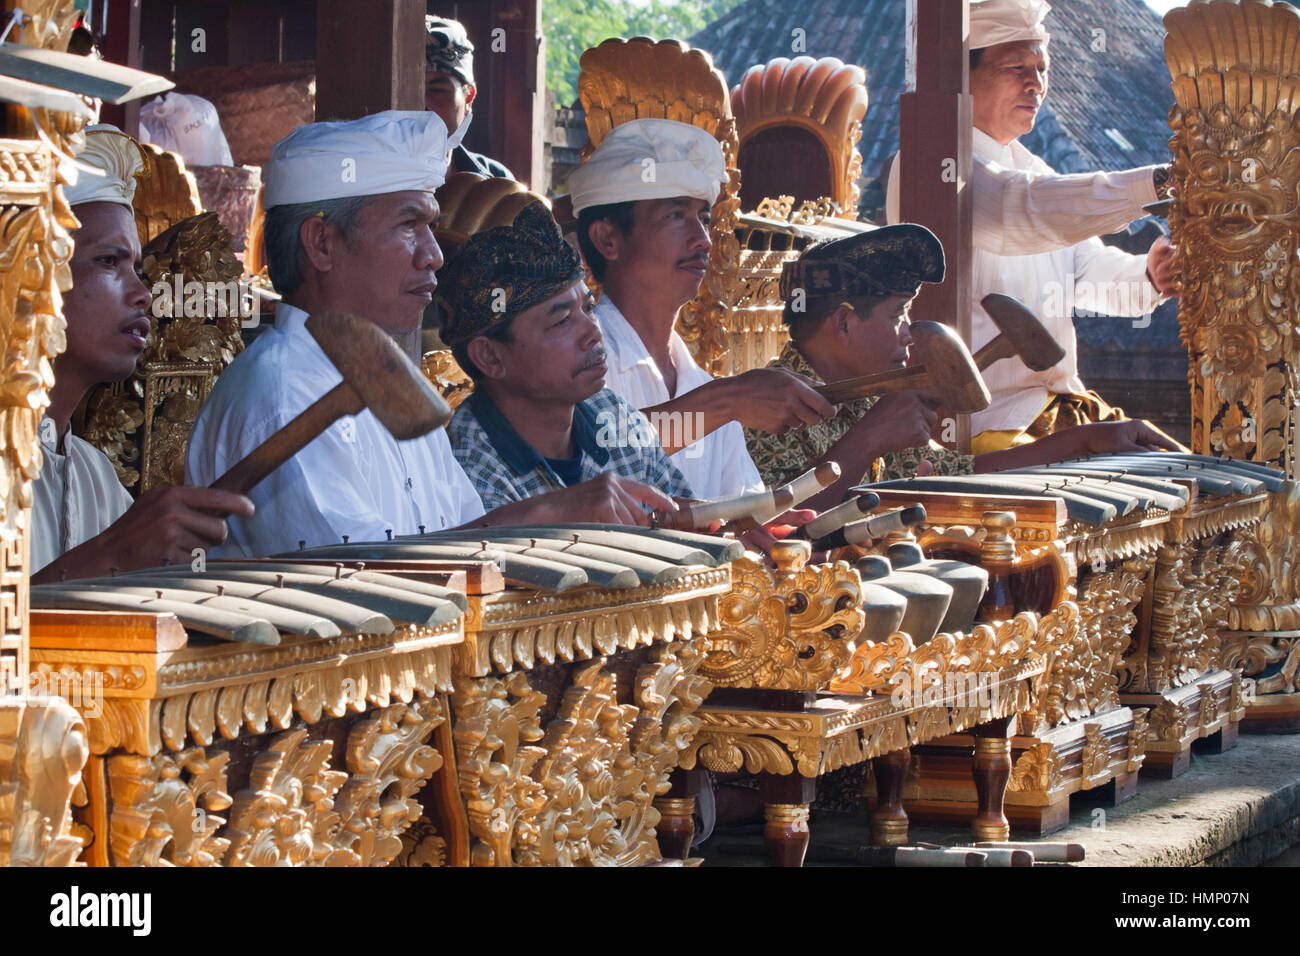 The Gamelan orchestra playing at the temple in Bali, Indonesia during the Galangun festival. Stock Photo